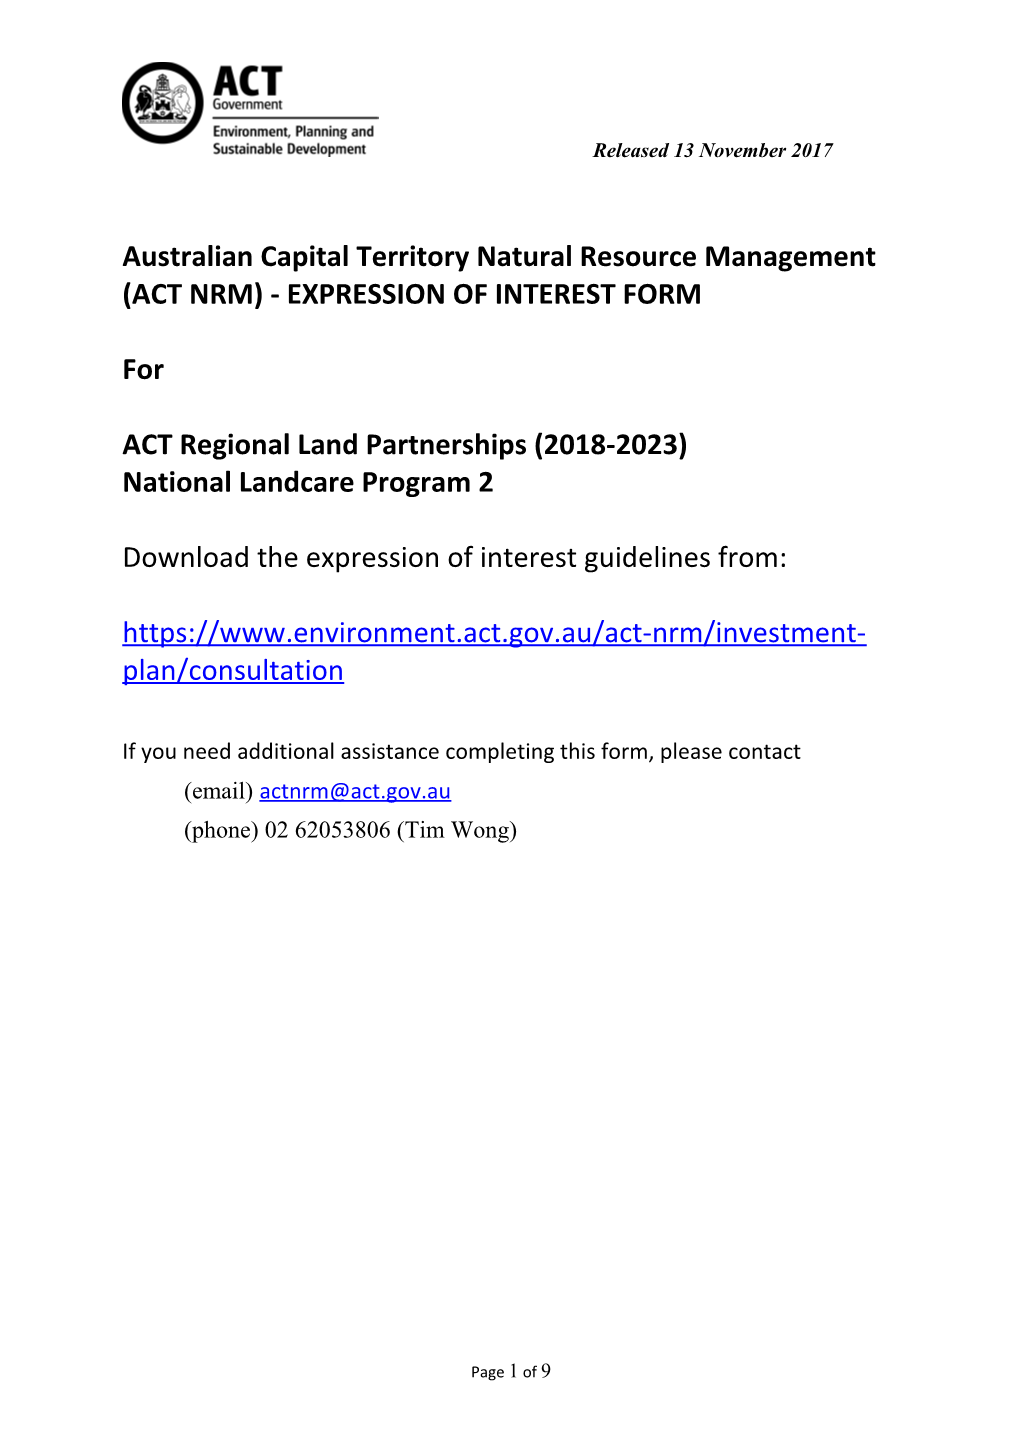 Australian Capital Territory Natural Resource Management (ACT NRM) - EXPRESSION of INTEREST